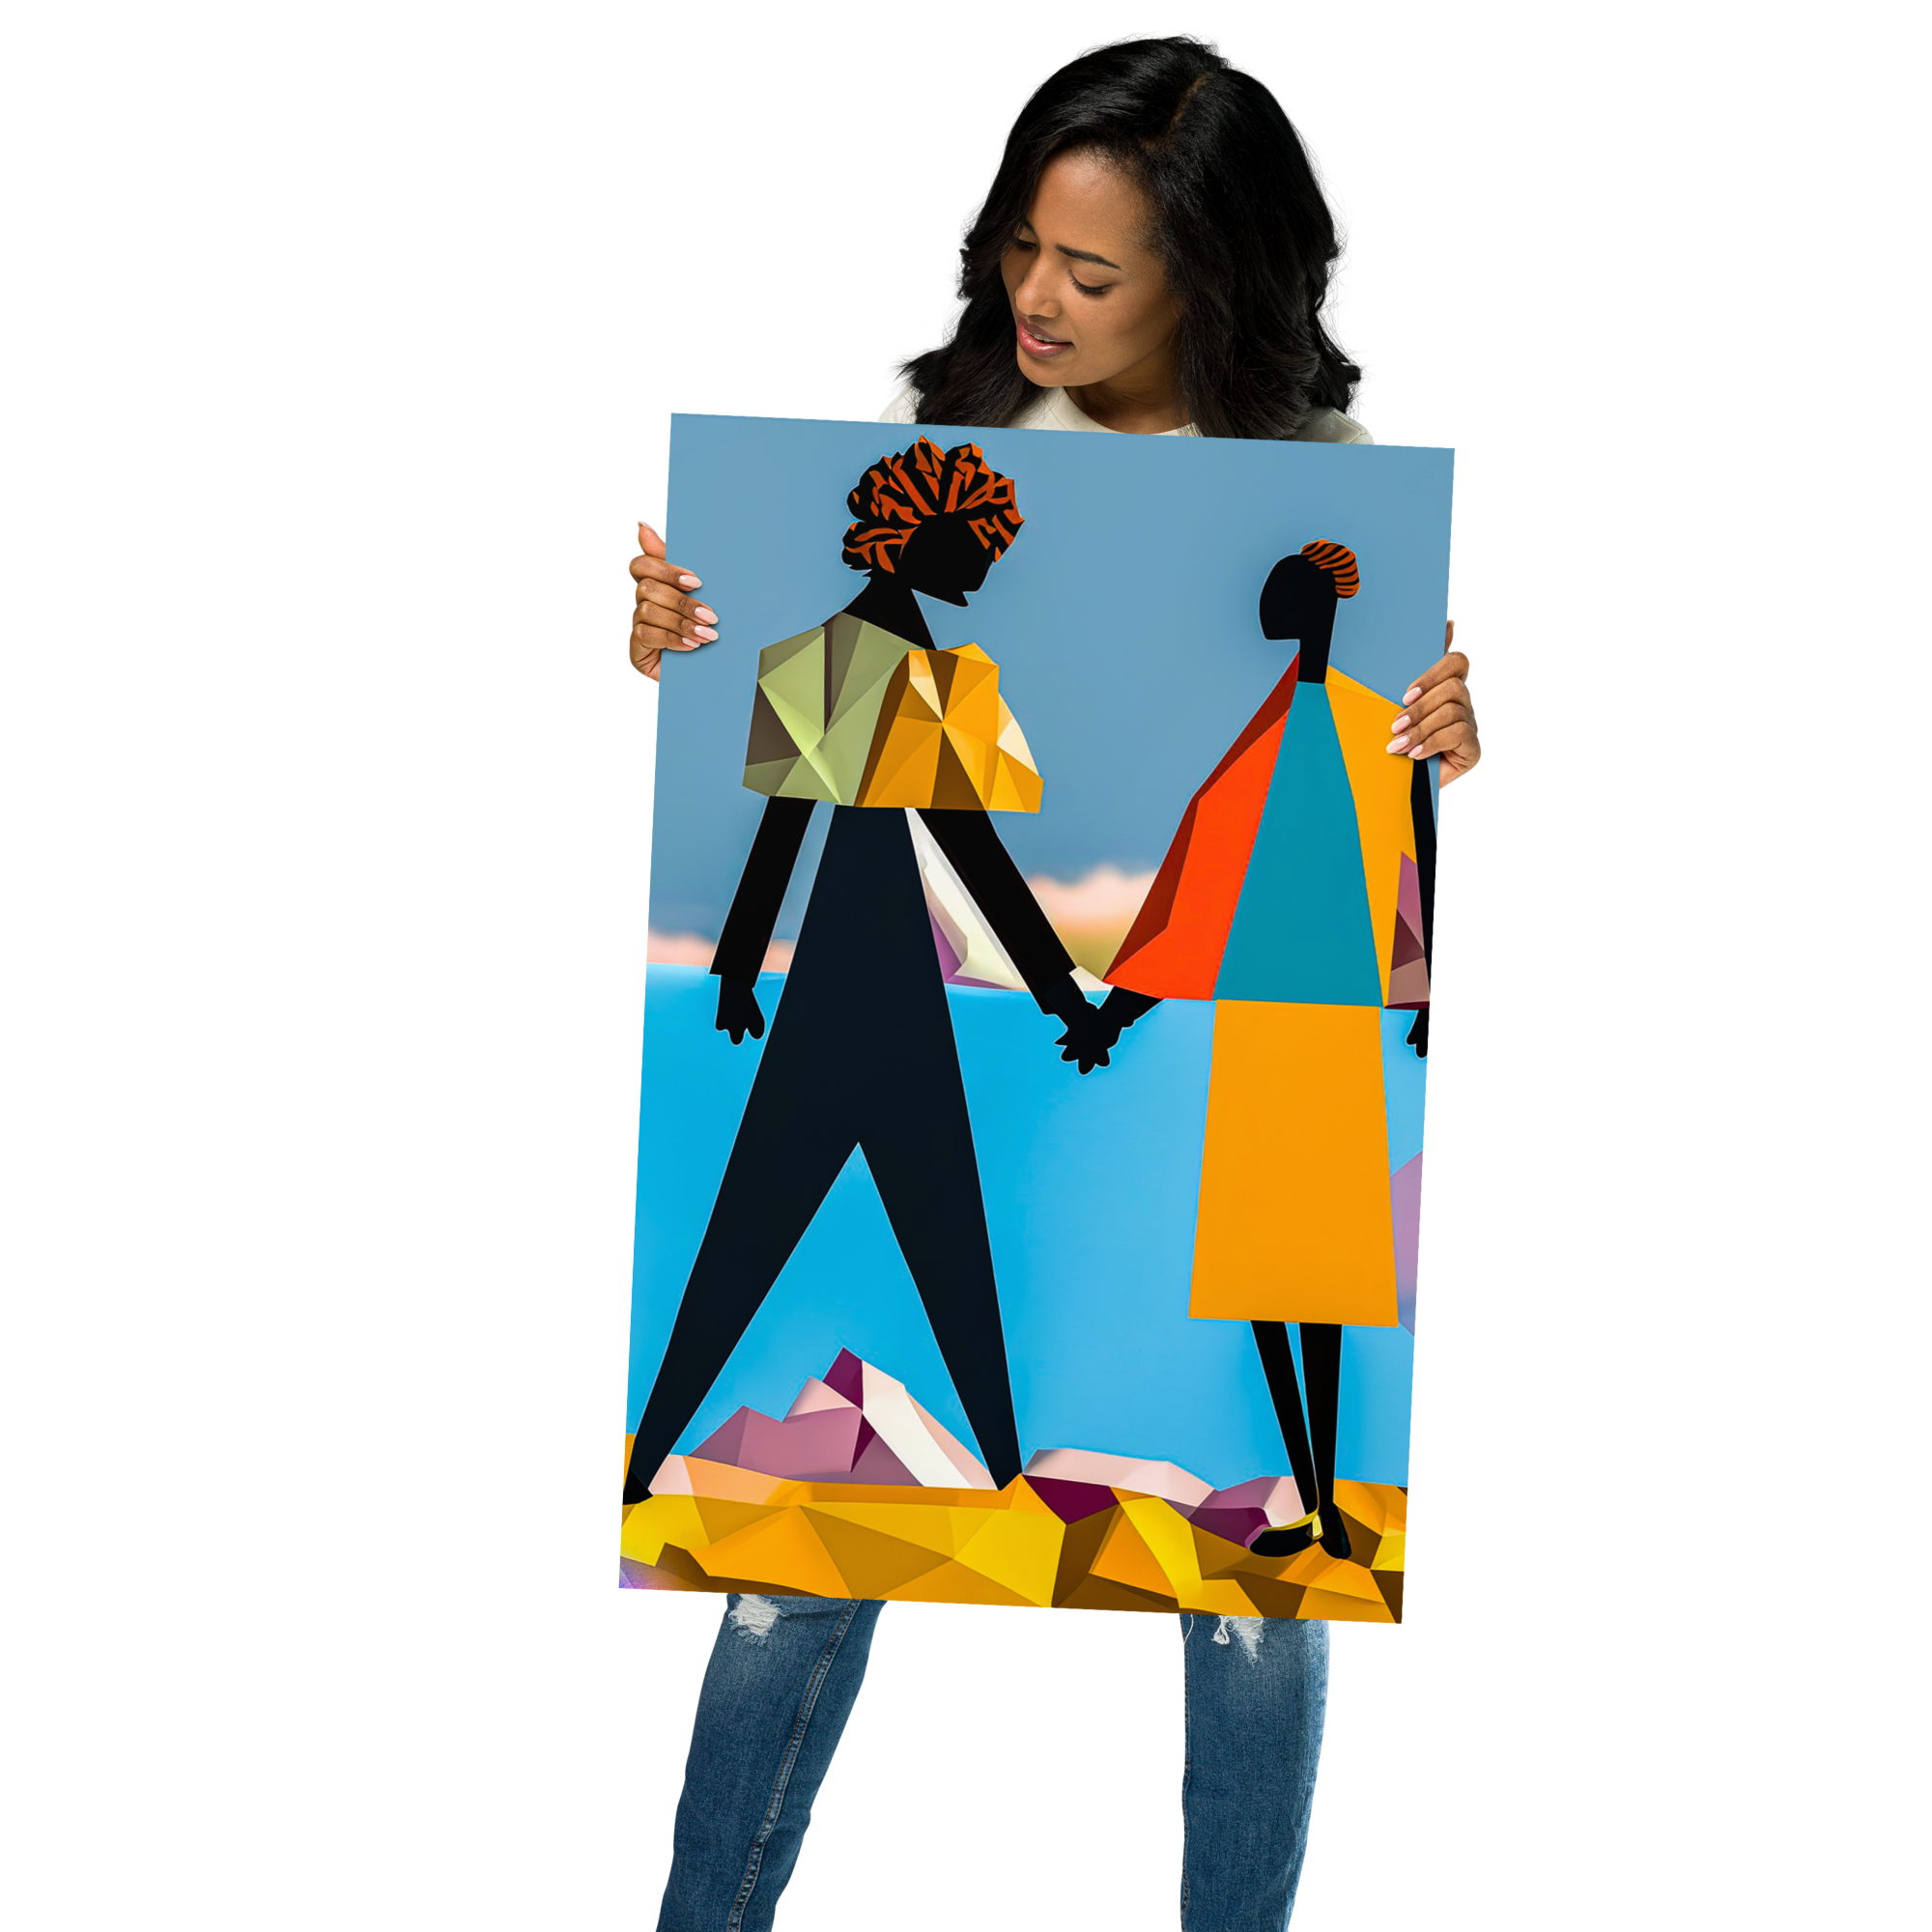 "HAND IN HAND" - African American Themed Poster Wall Art